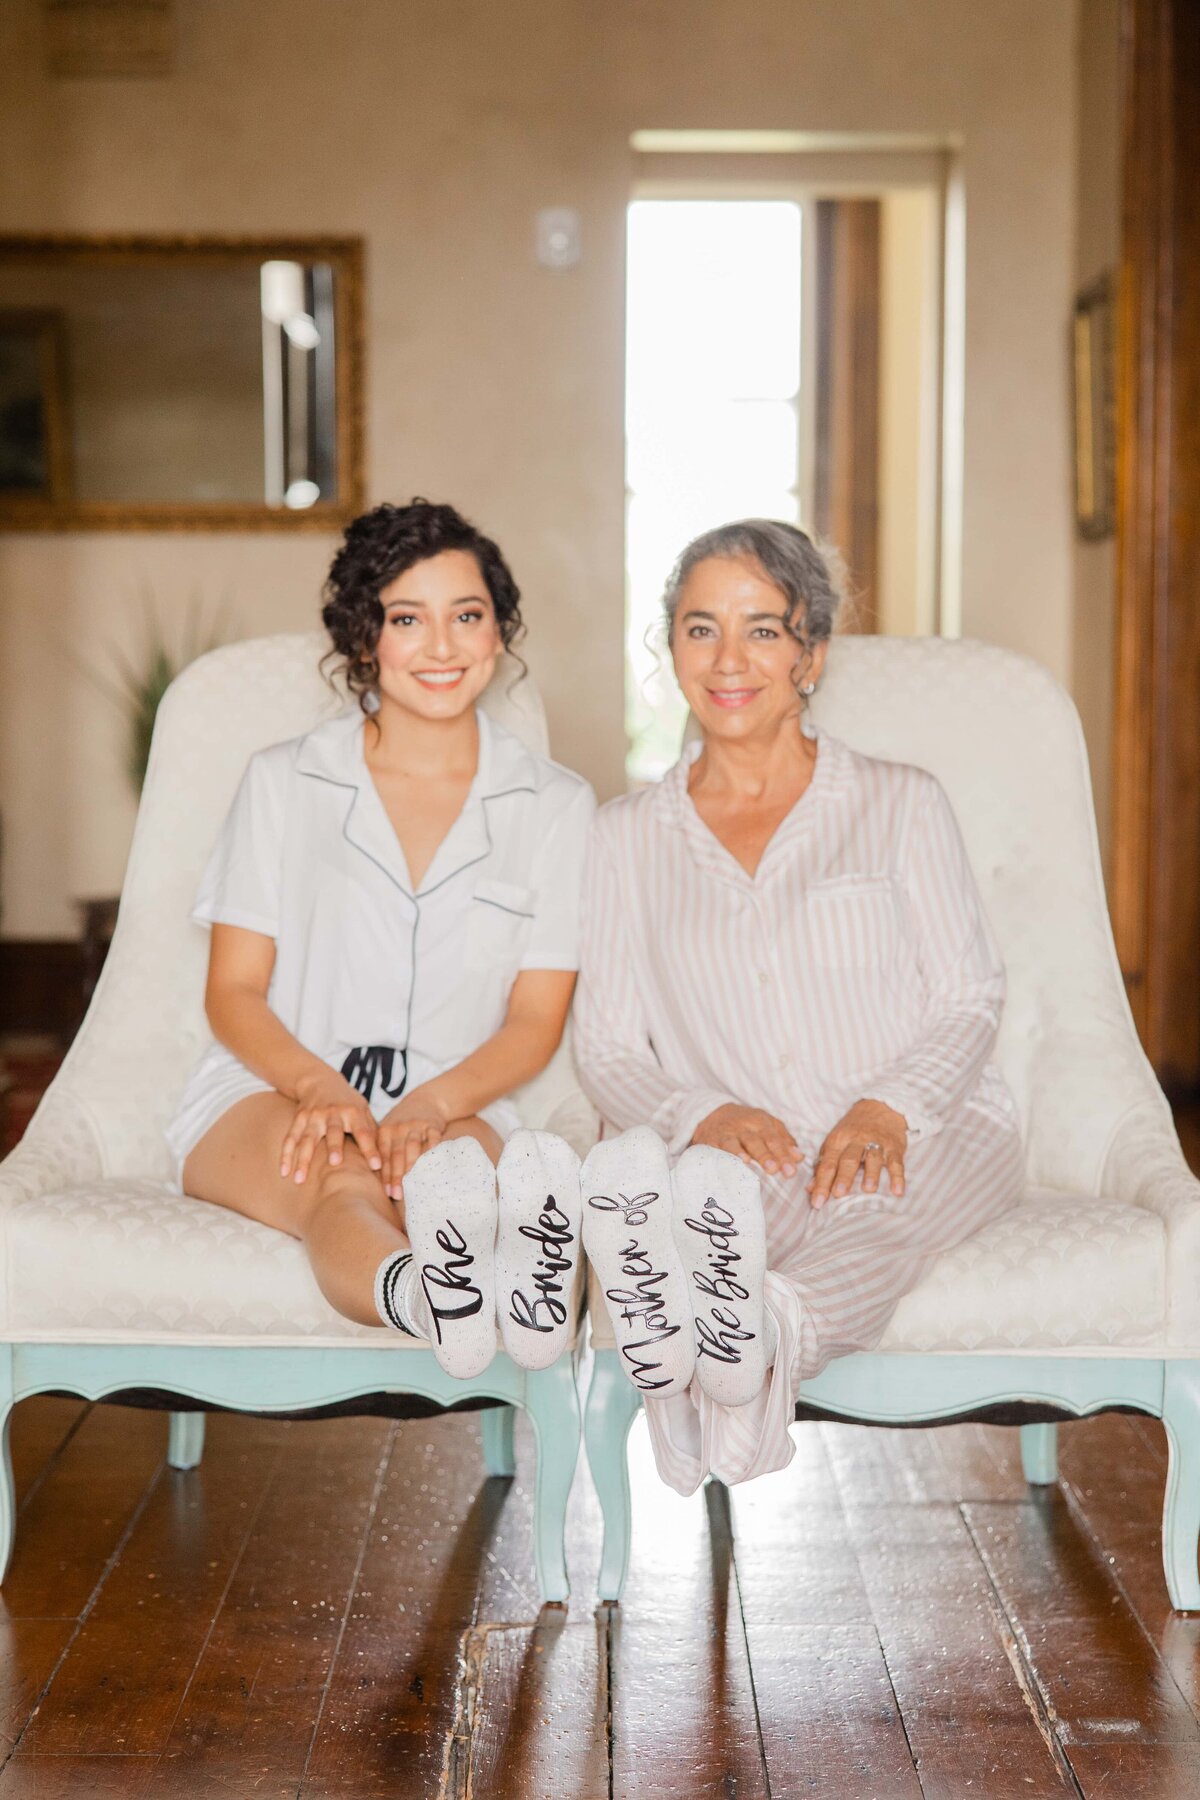 Two women in pajamas smiling on a sofa, displaying slippers that read "bride" and "mother of the bride," likely gearing up for an Iowa wedding.